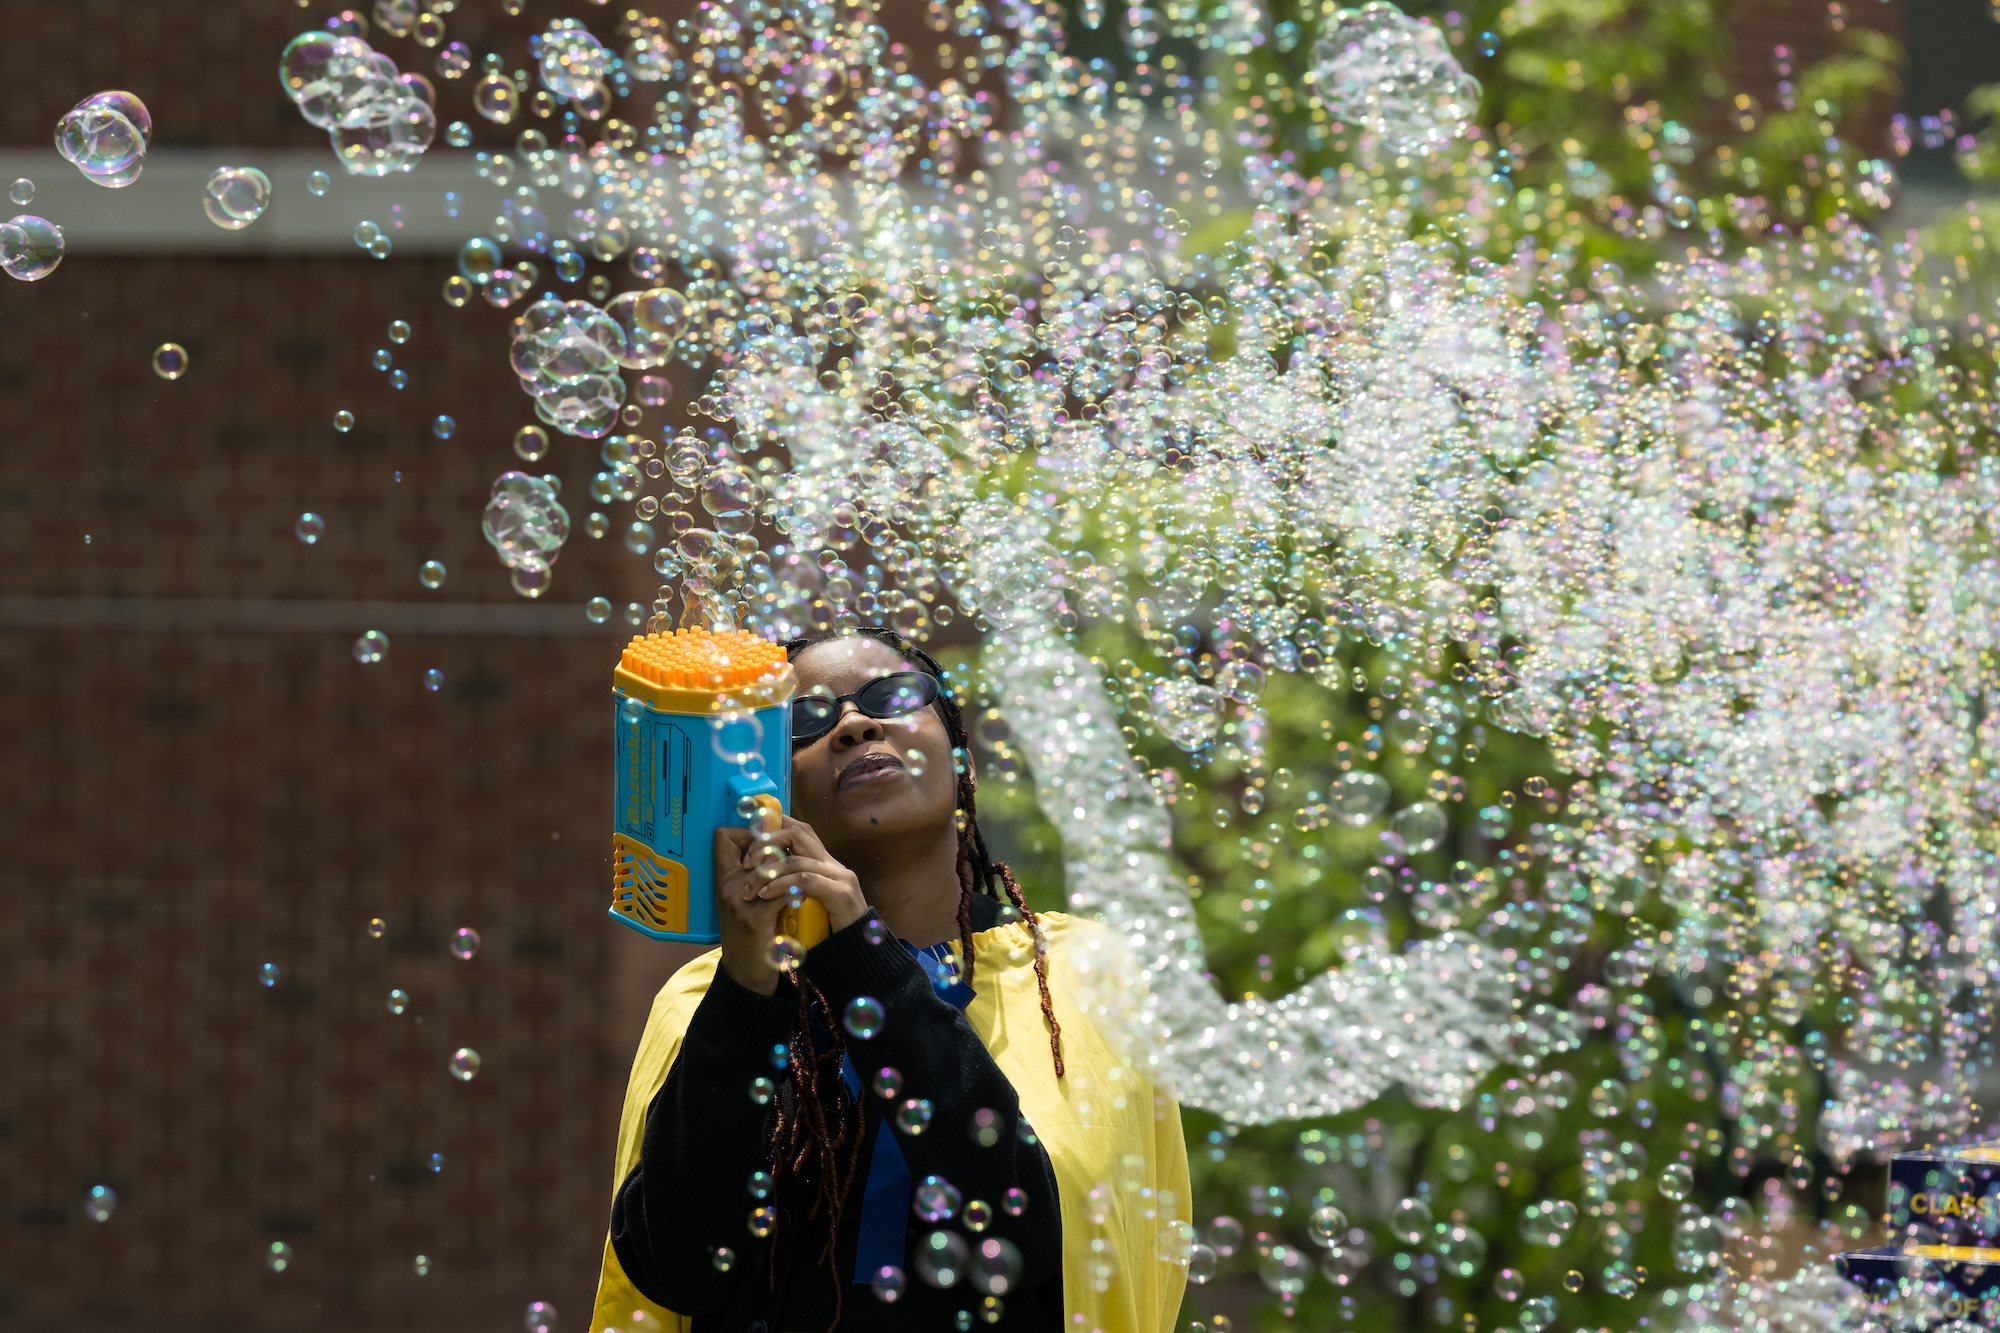 University of Rochester student in sunglasses blowing bubbles through a bubble gun